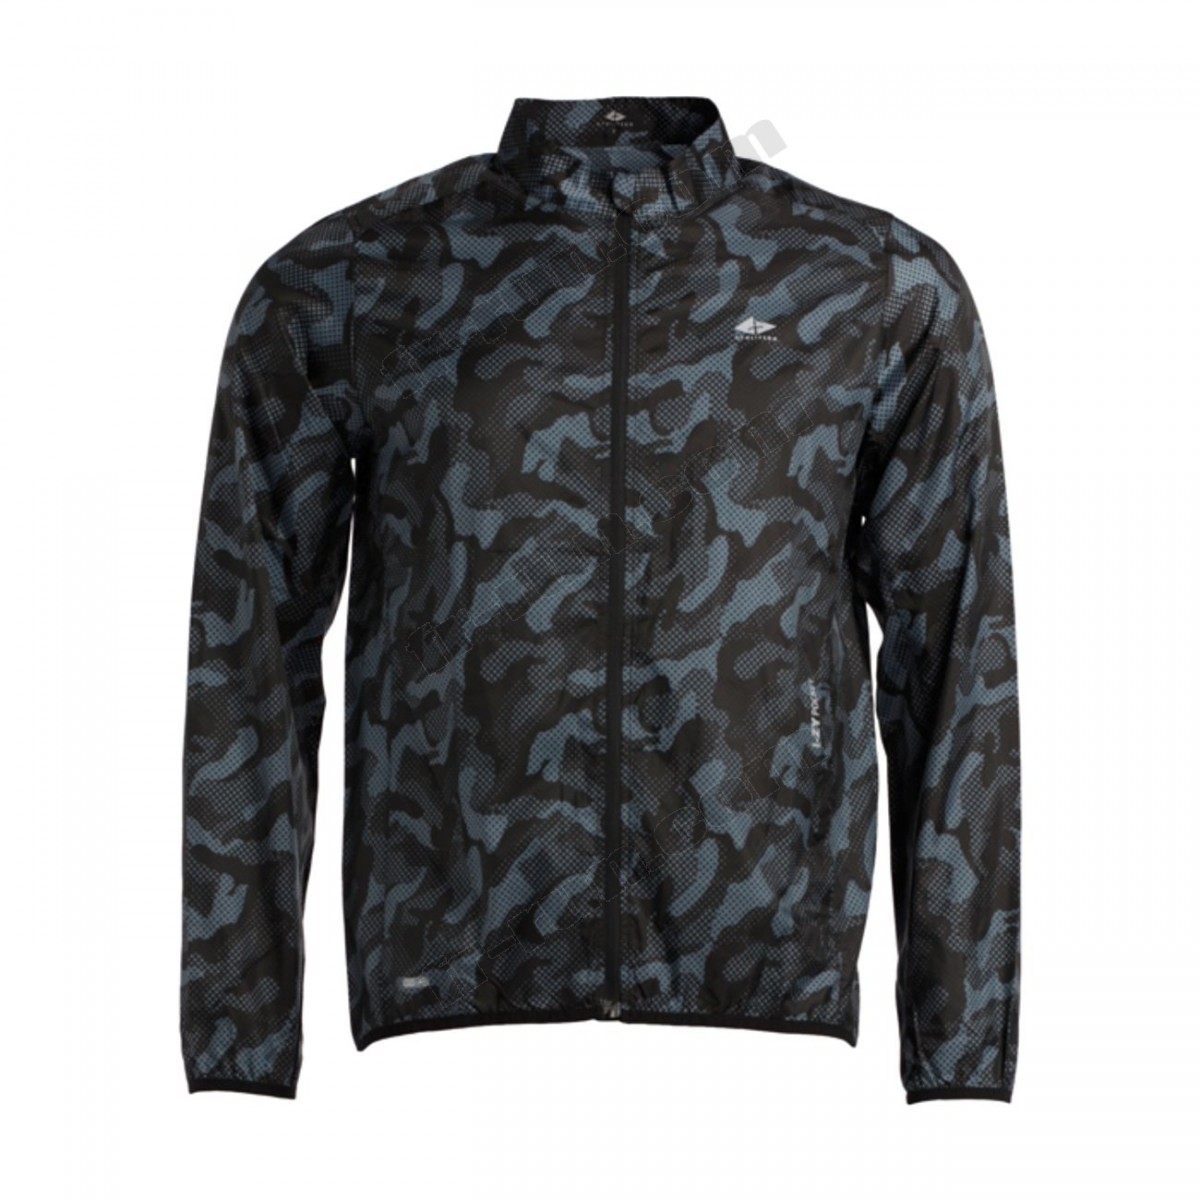 Athlitech/COUPE-VENT running homme ATHLITECH KEVIN 100 √ Nouveau style √ Soldes - Athlitech/COUPE-VENT running homme ATHLITECH KEVIN 100 √ Nouveau style √ Soldes